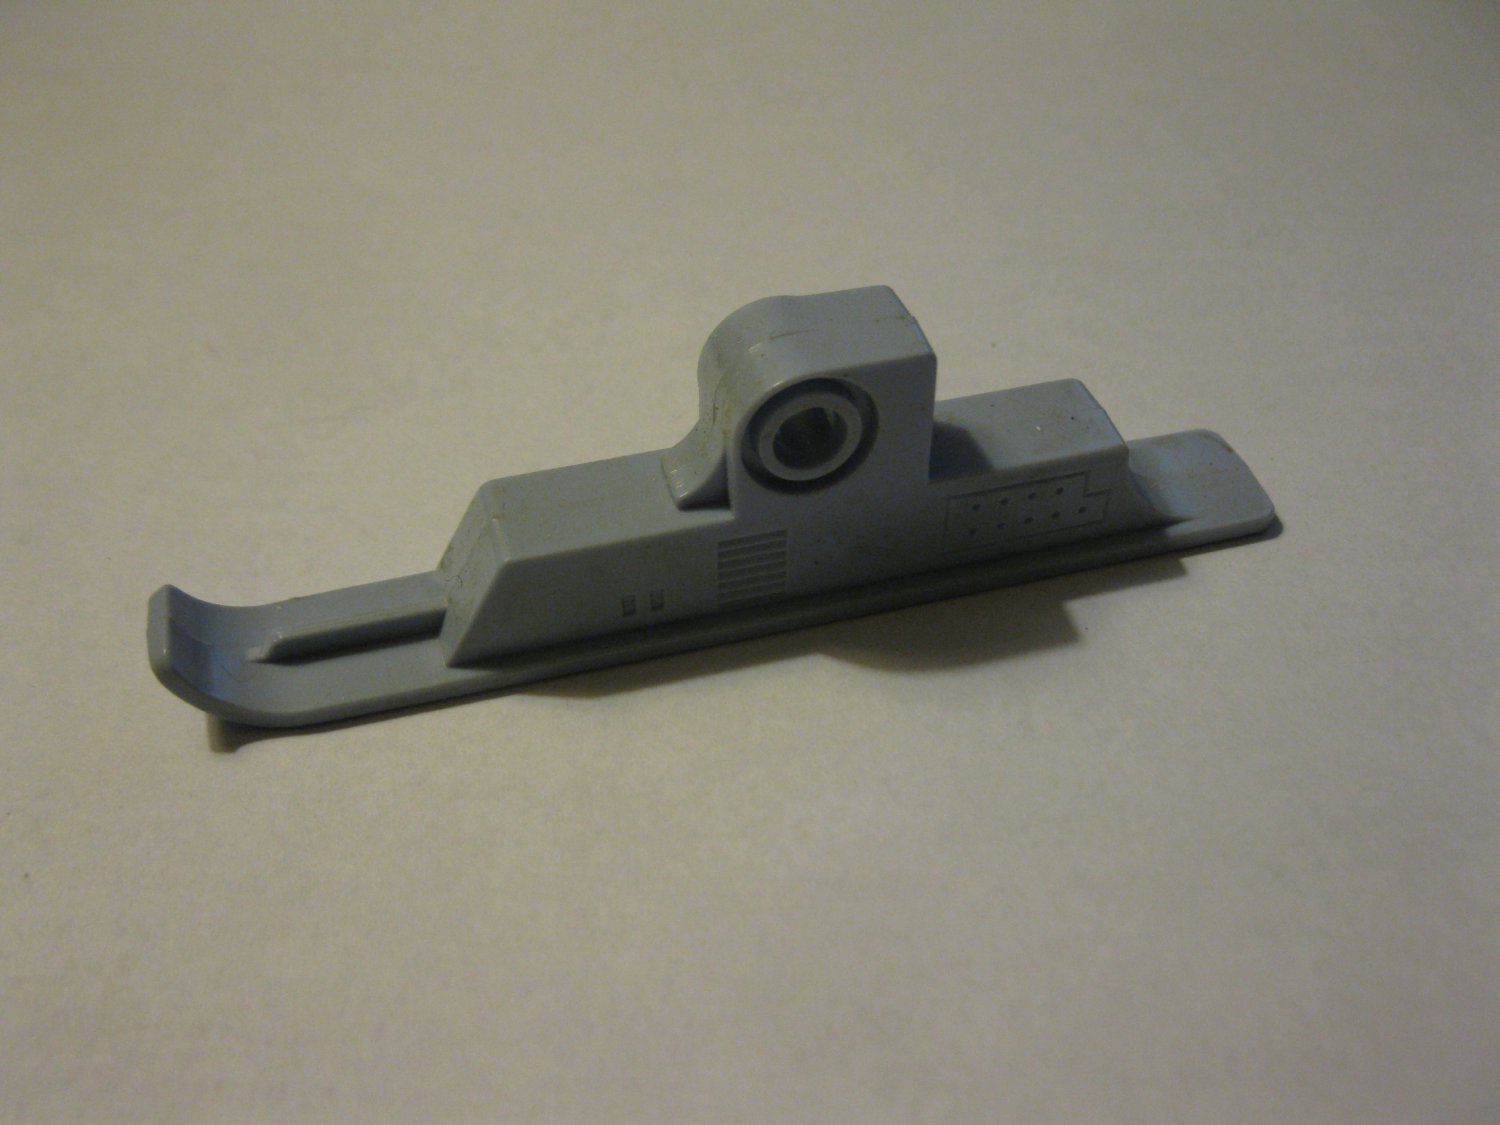 G1 Transformers Action figure part: 1985 Whirl - Left Side Helicopter Landing Skid